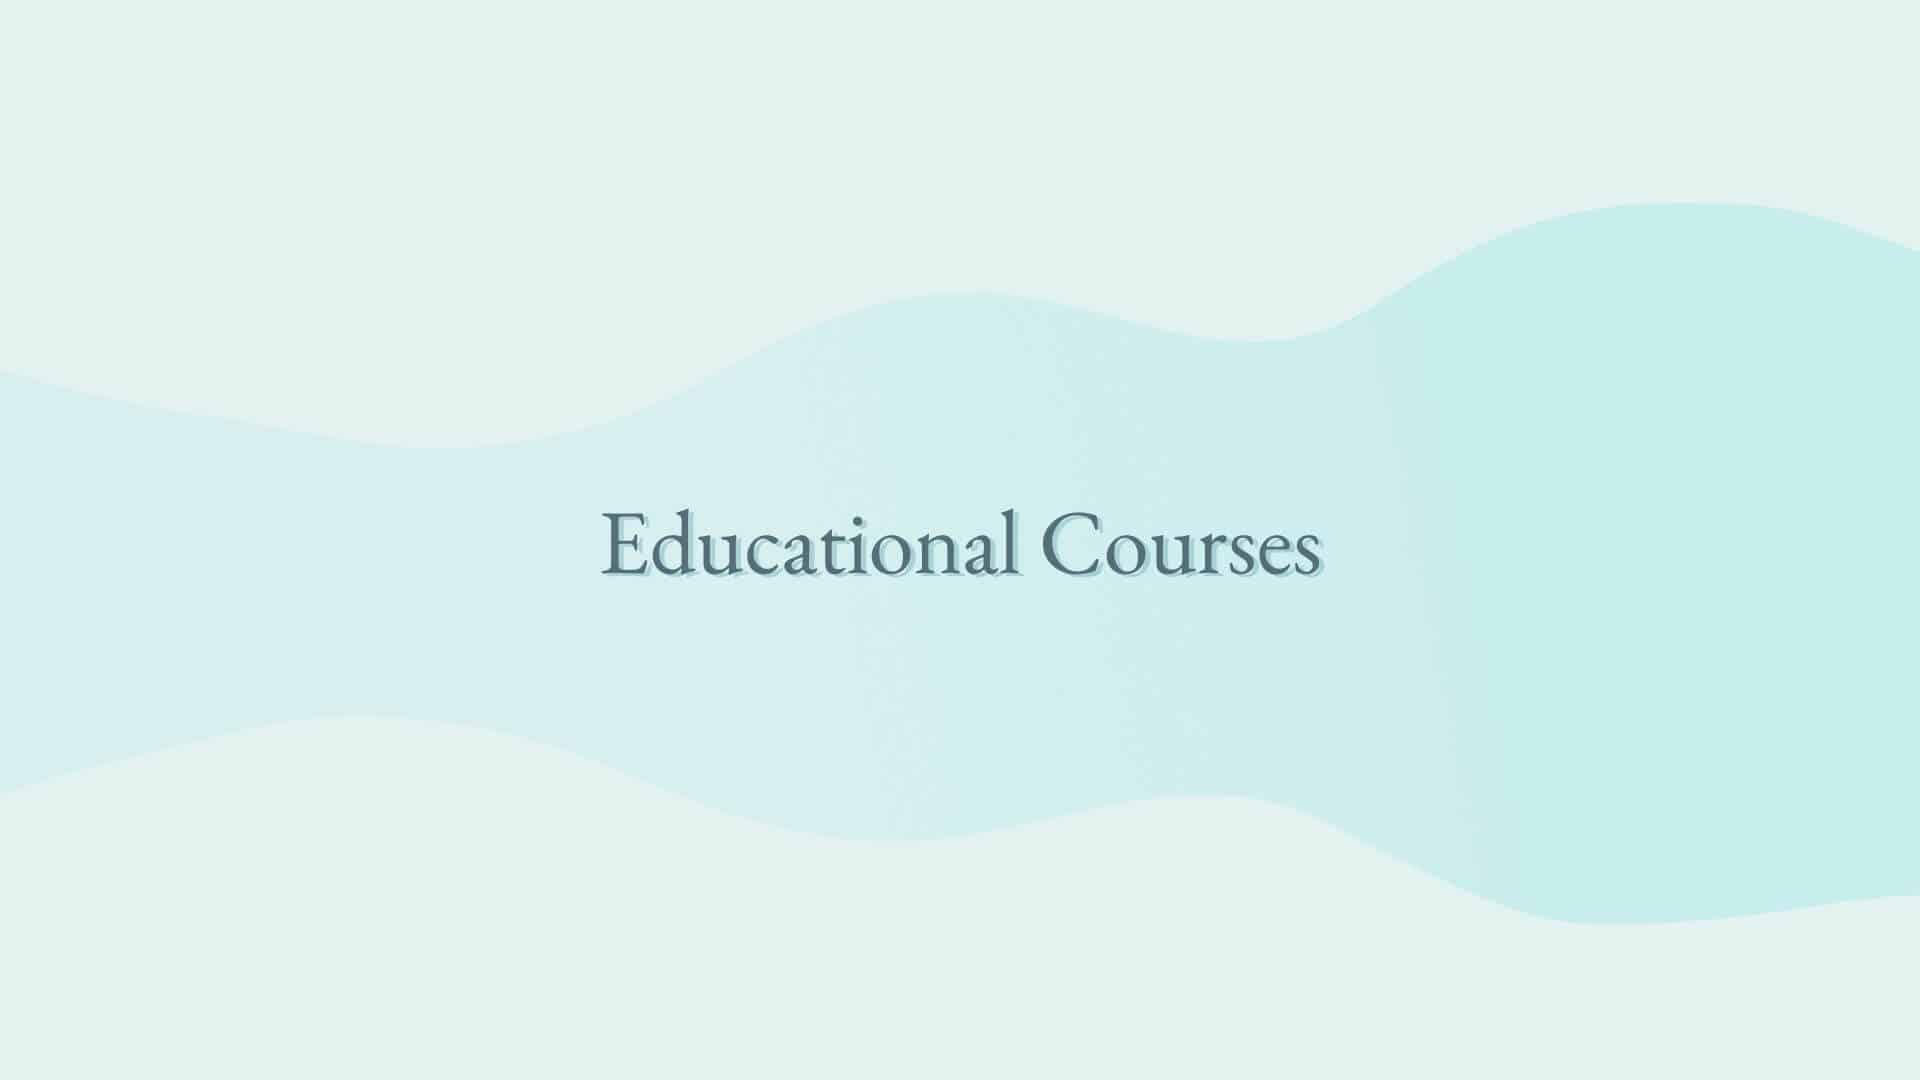 Educational Courses 8